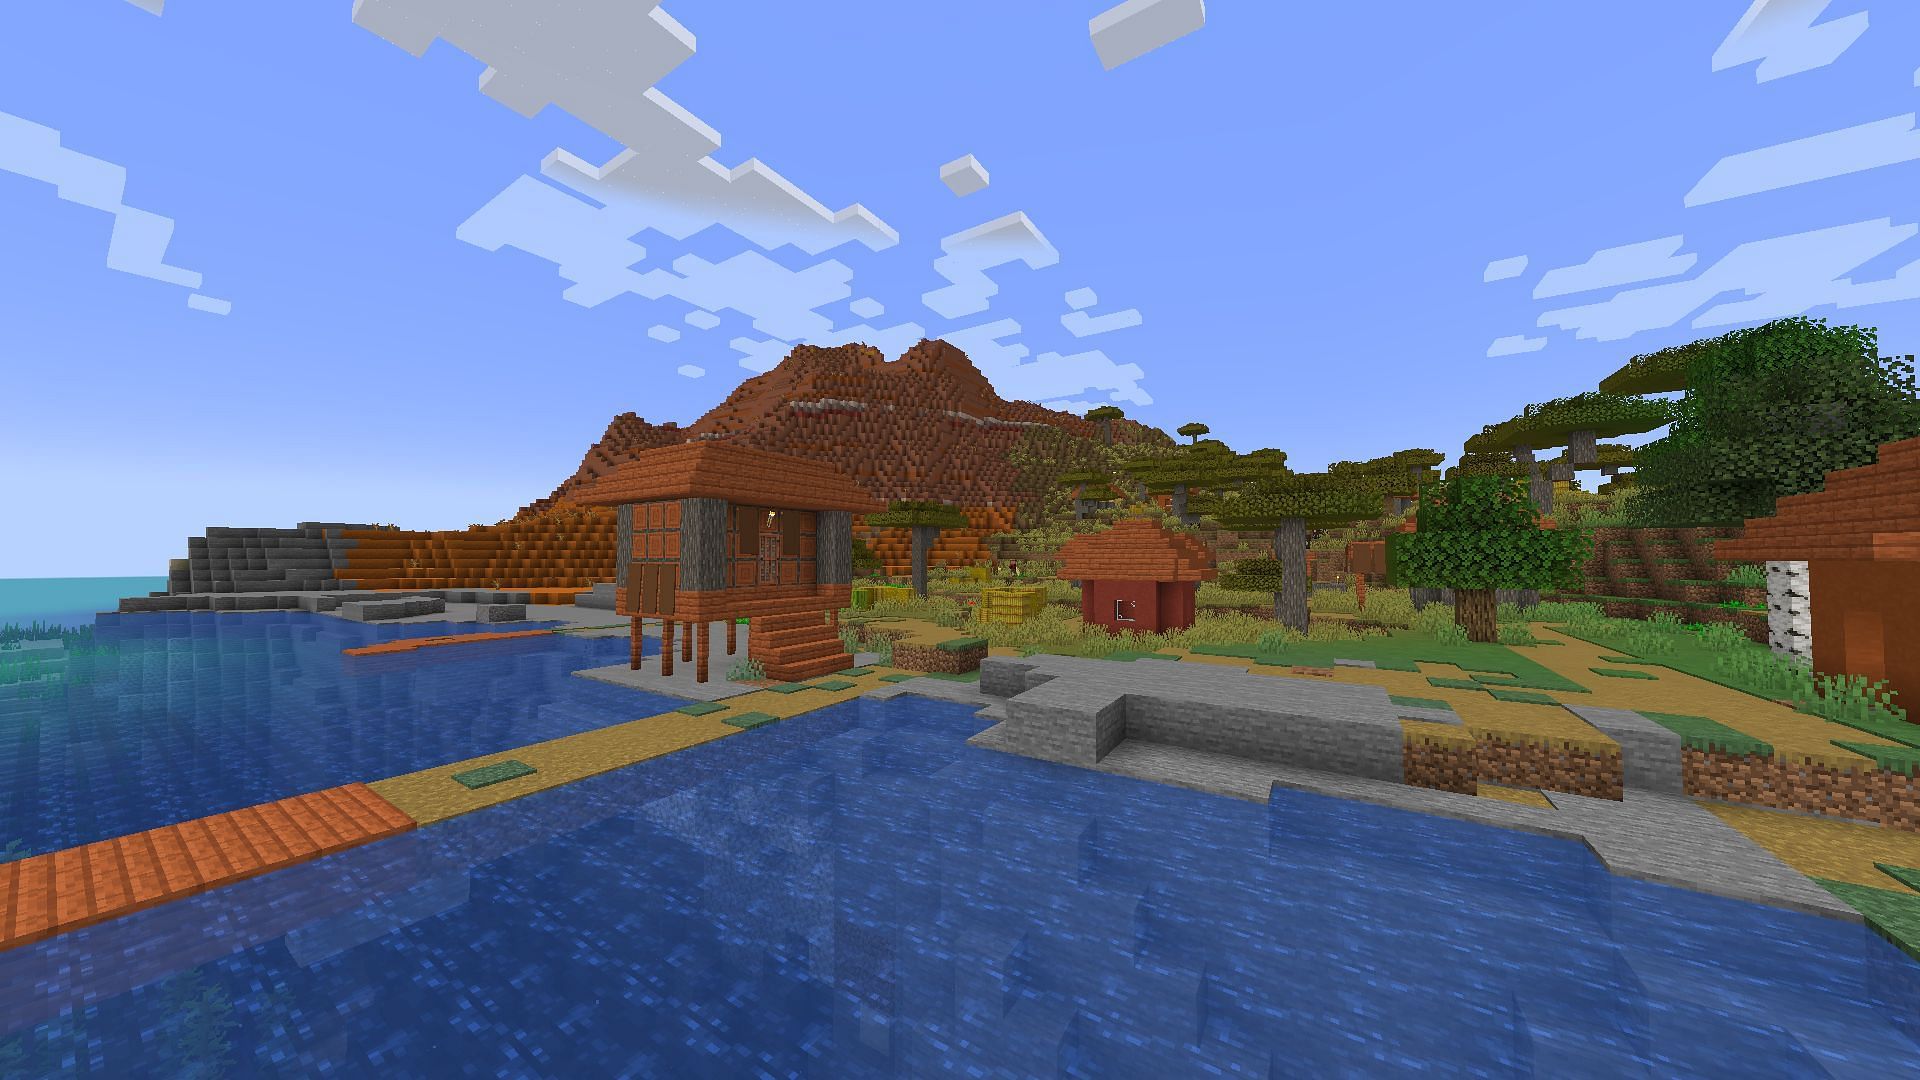 Players can obtain loads of resources from Villages in Minecraft (Image via Mojang)